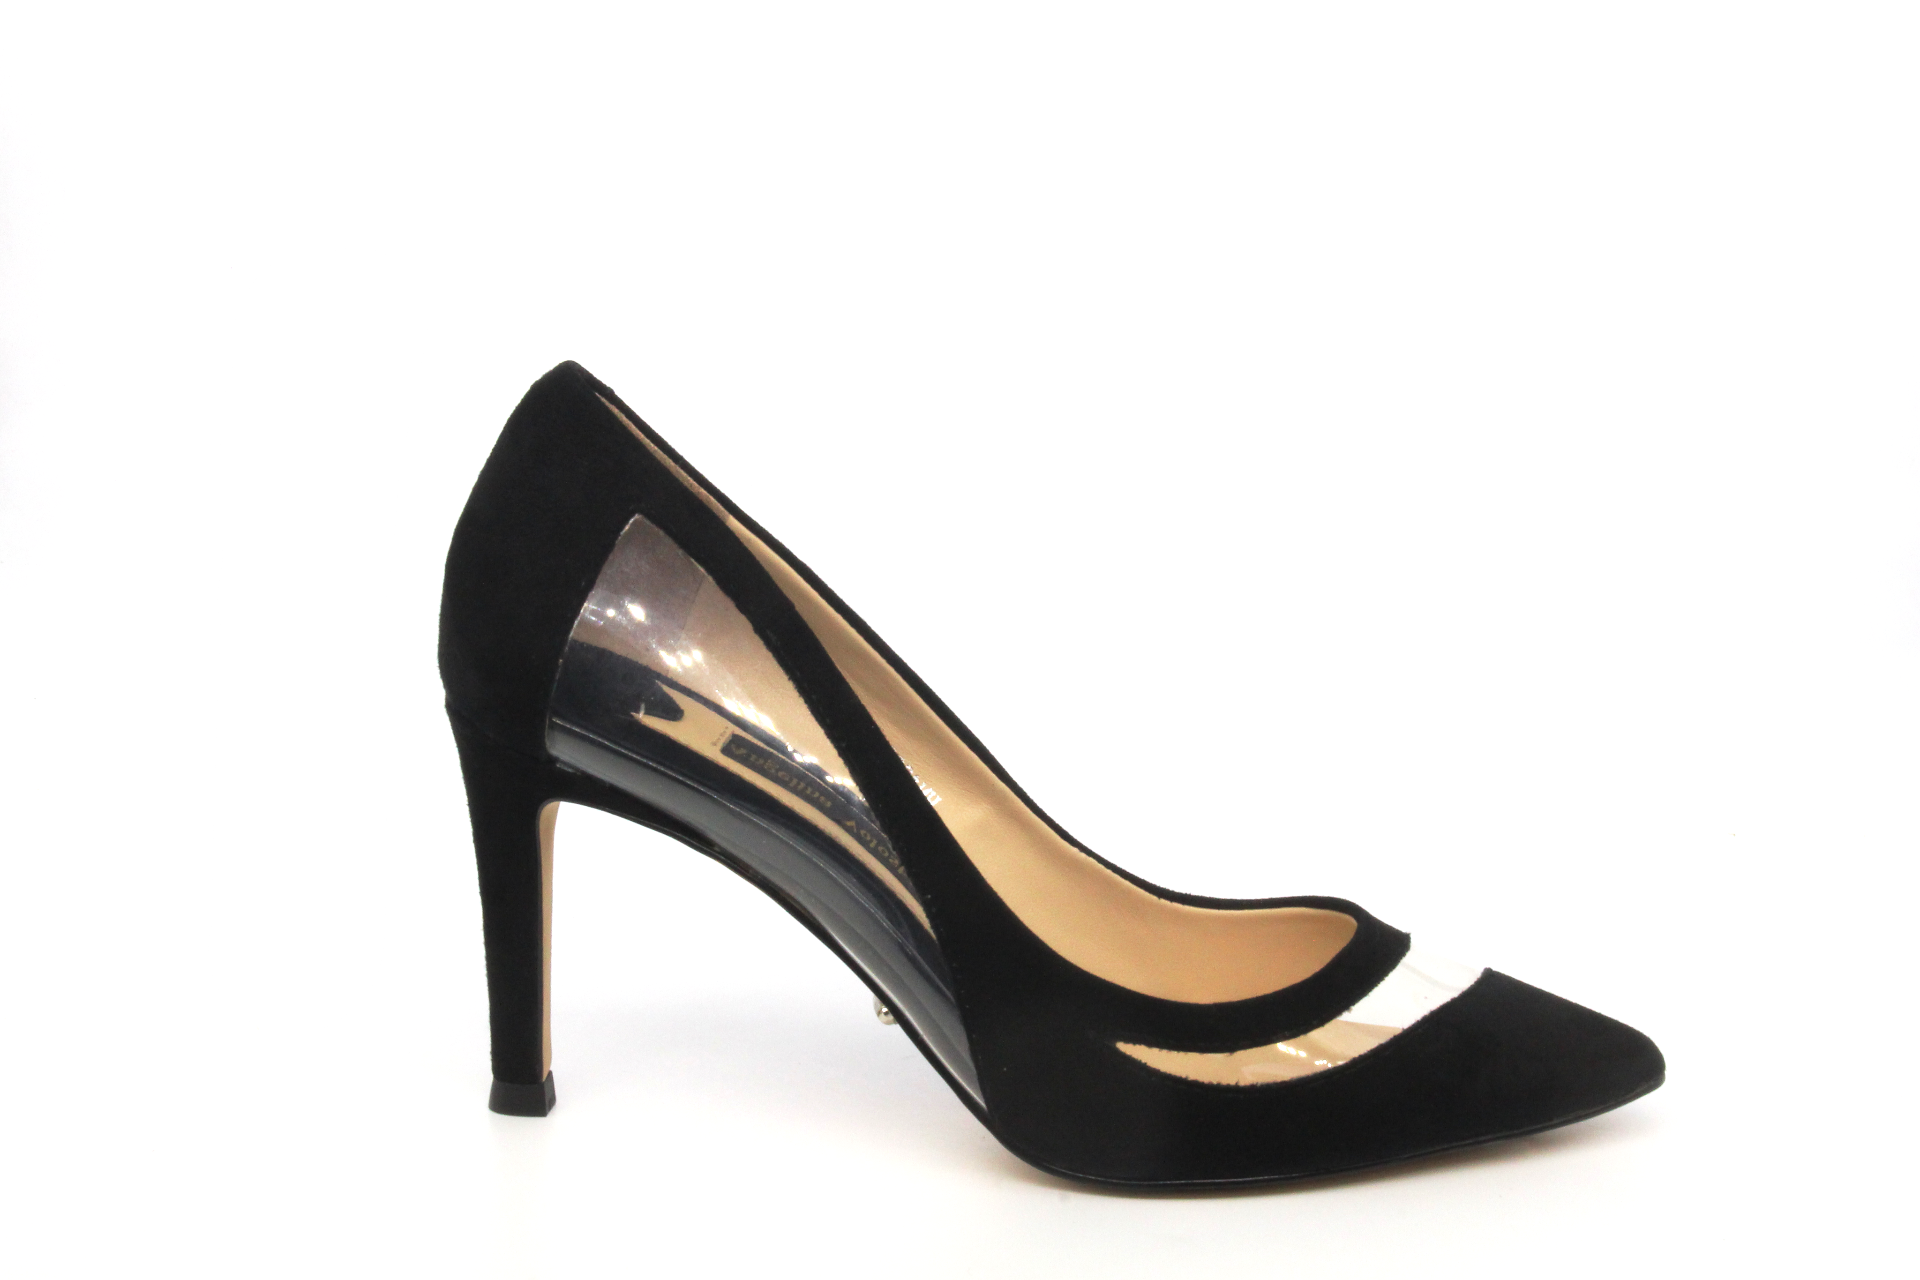 black and white pumps 3 inch heel